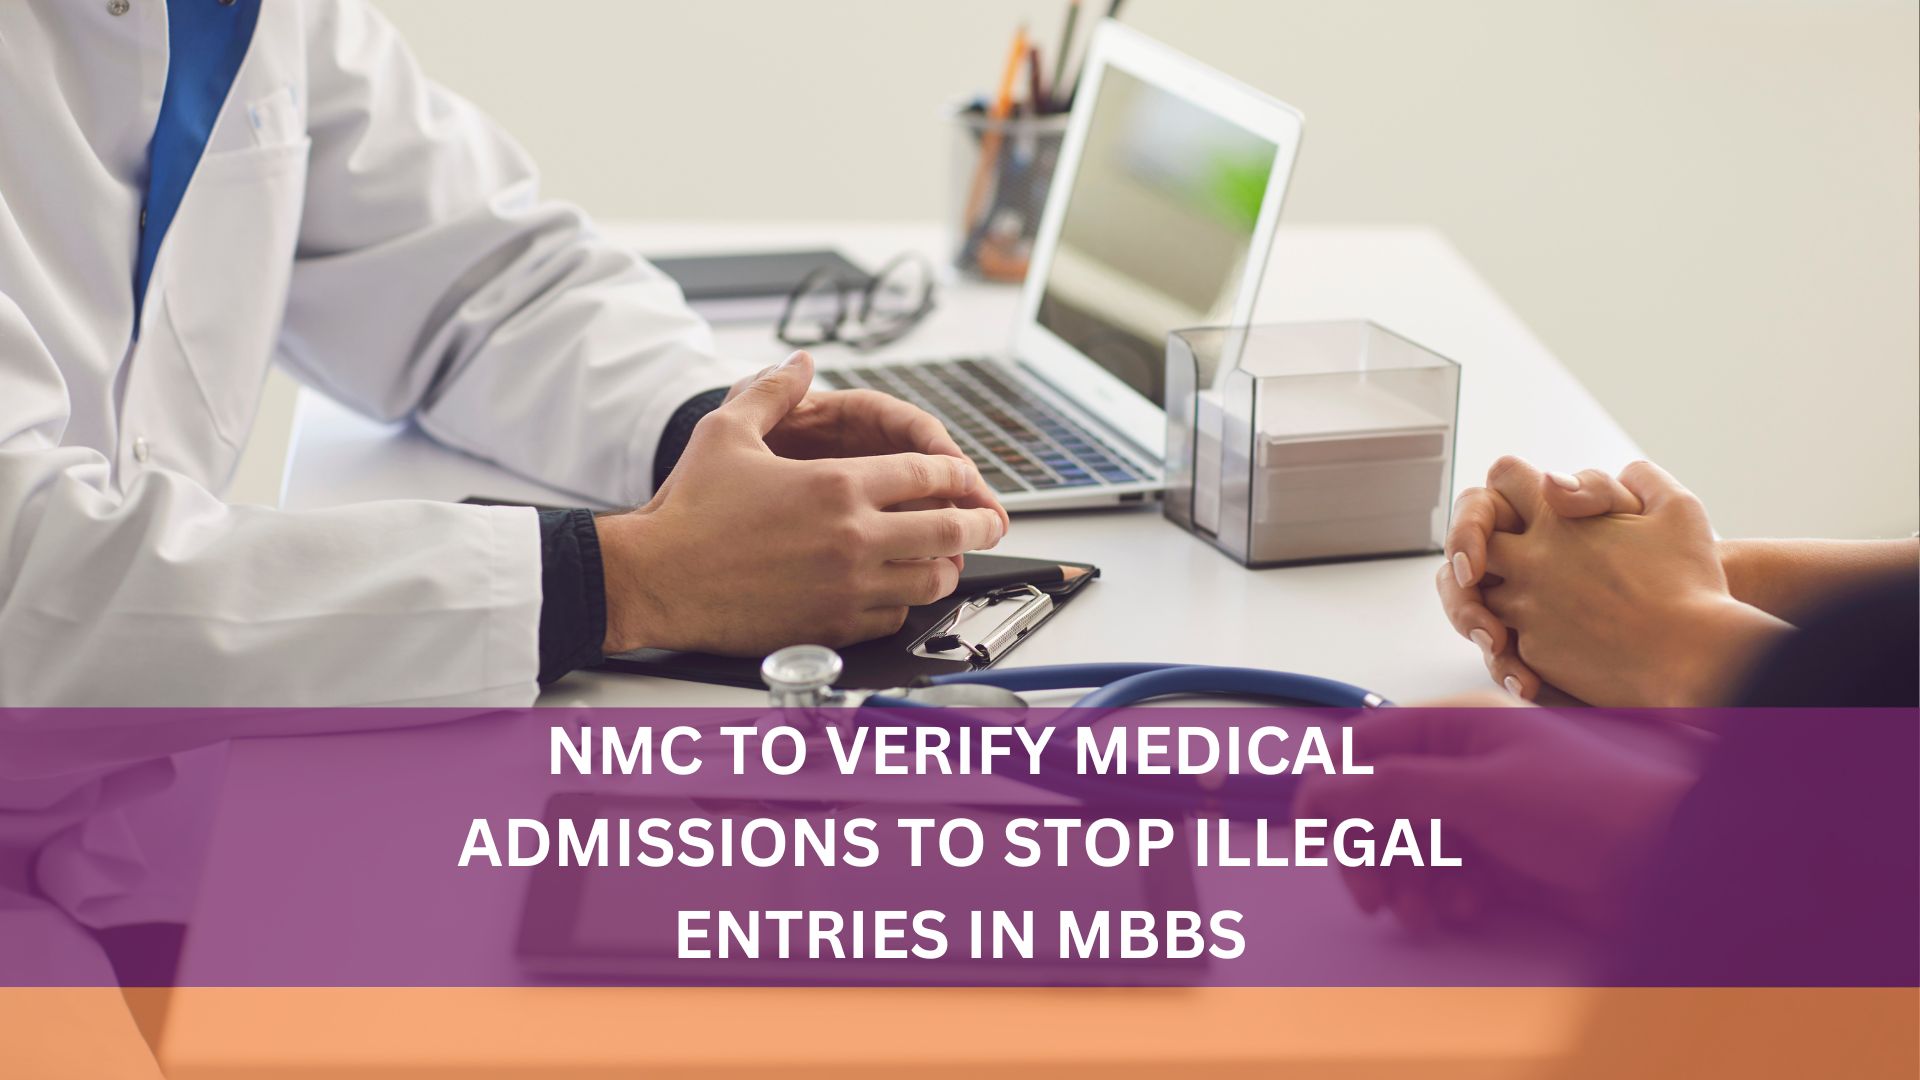 NMC TO VERIFY MEDICAL ADMISSIONS TO STOP ILLEGAL ENTRIES IN MBBS